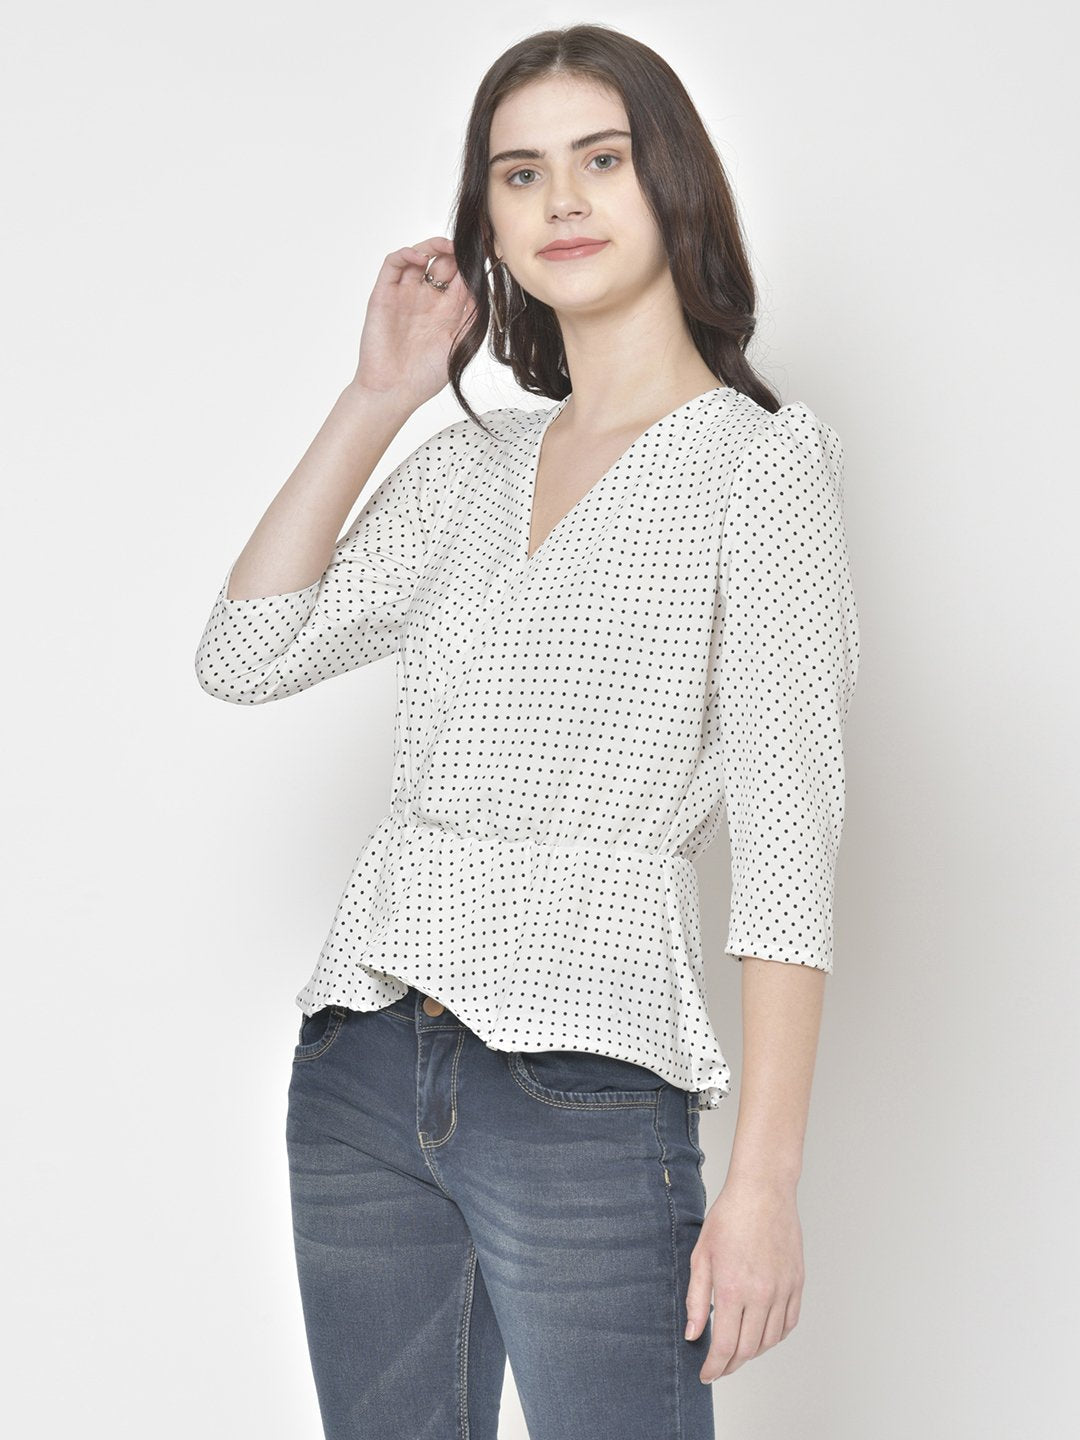 Cation White Printed Top